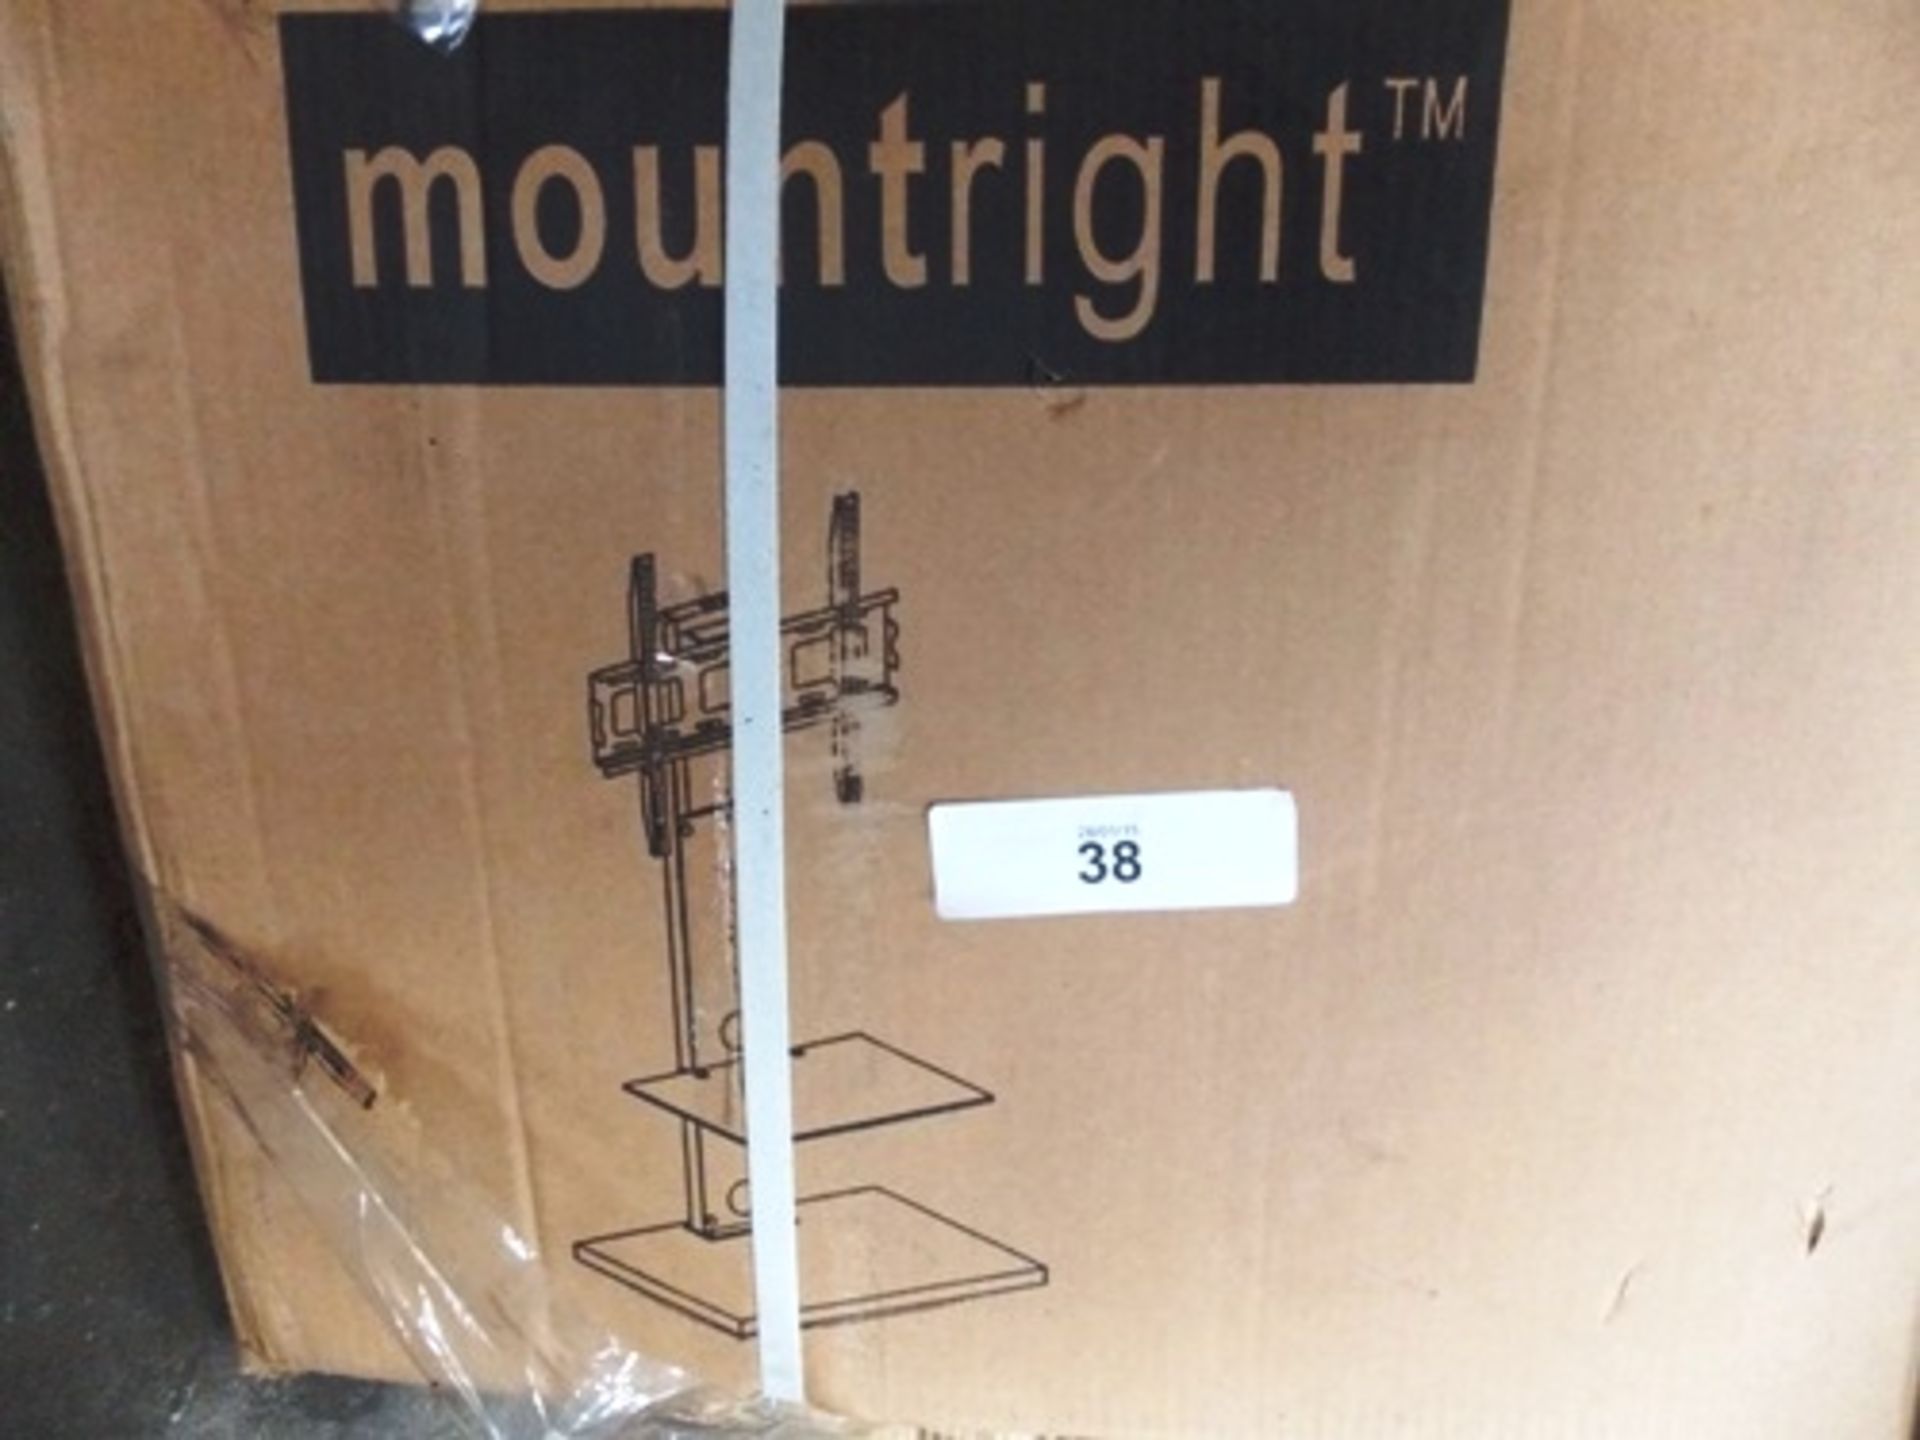 Mountright MK001 floor stand TV/monitor mount - New in box